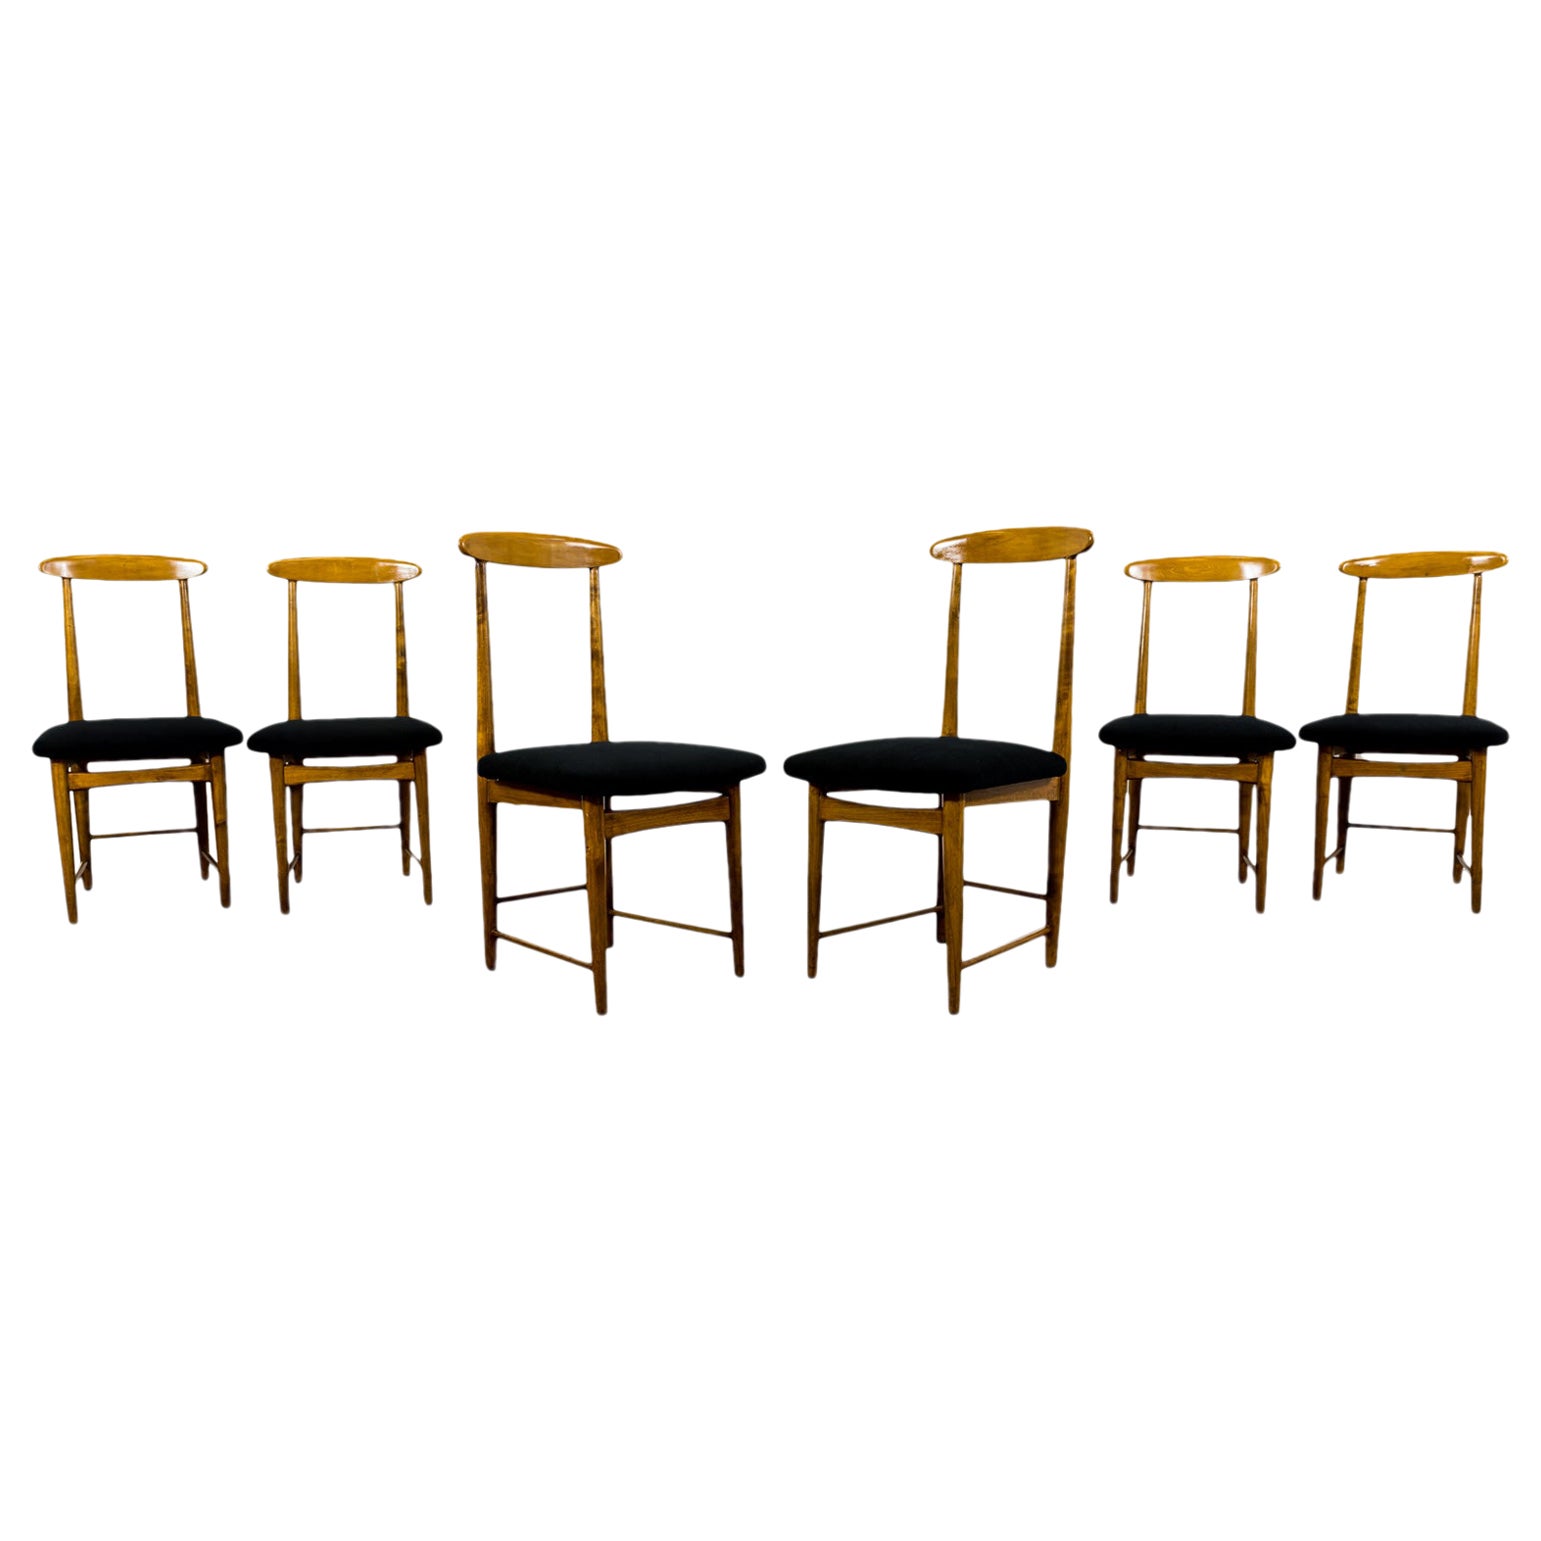 Set Of 6 Dining Chairs By Bernard Malendowicz 1960's For Sale